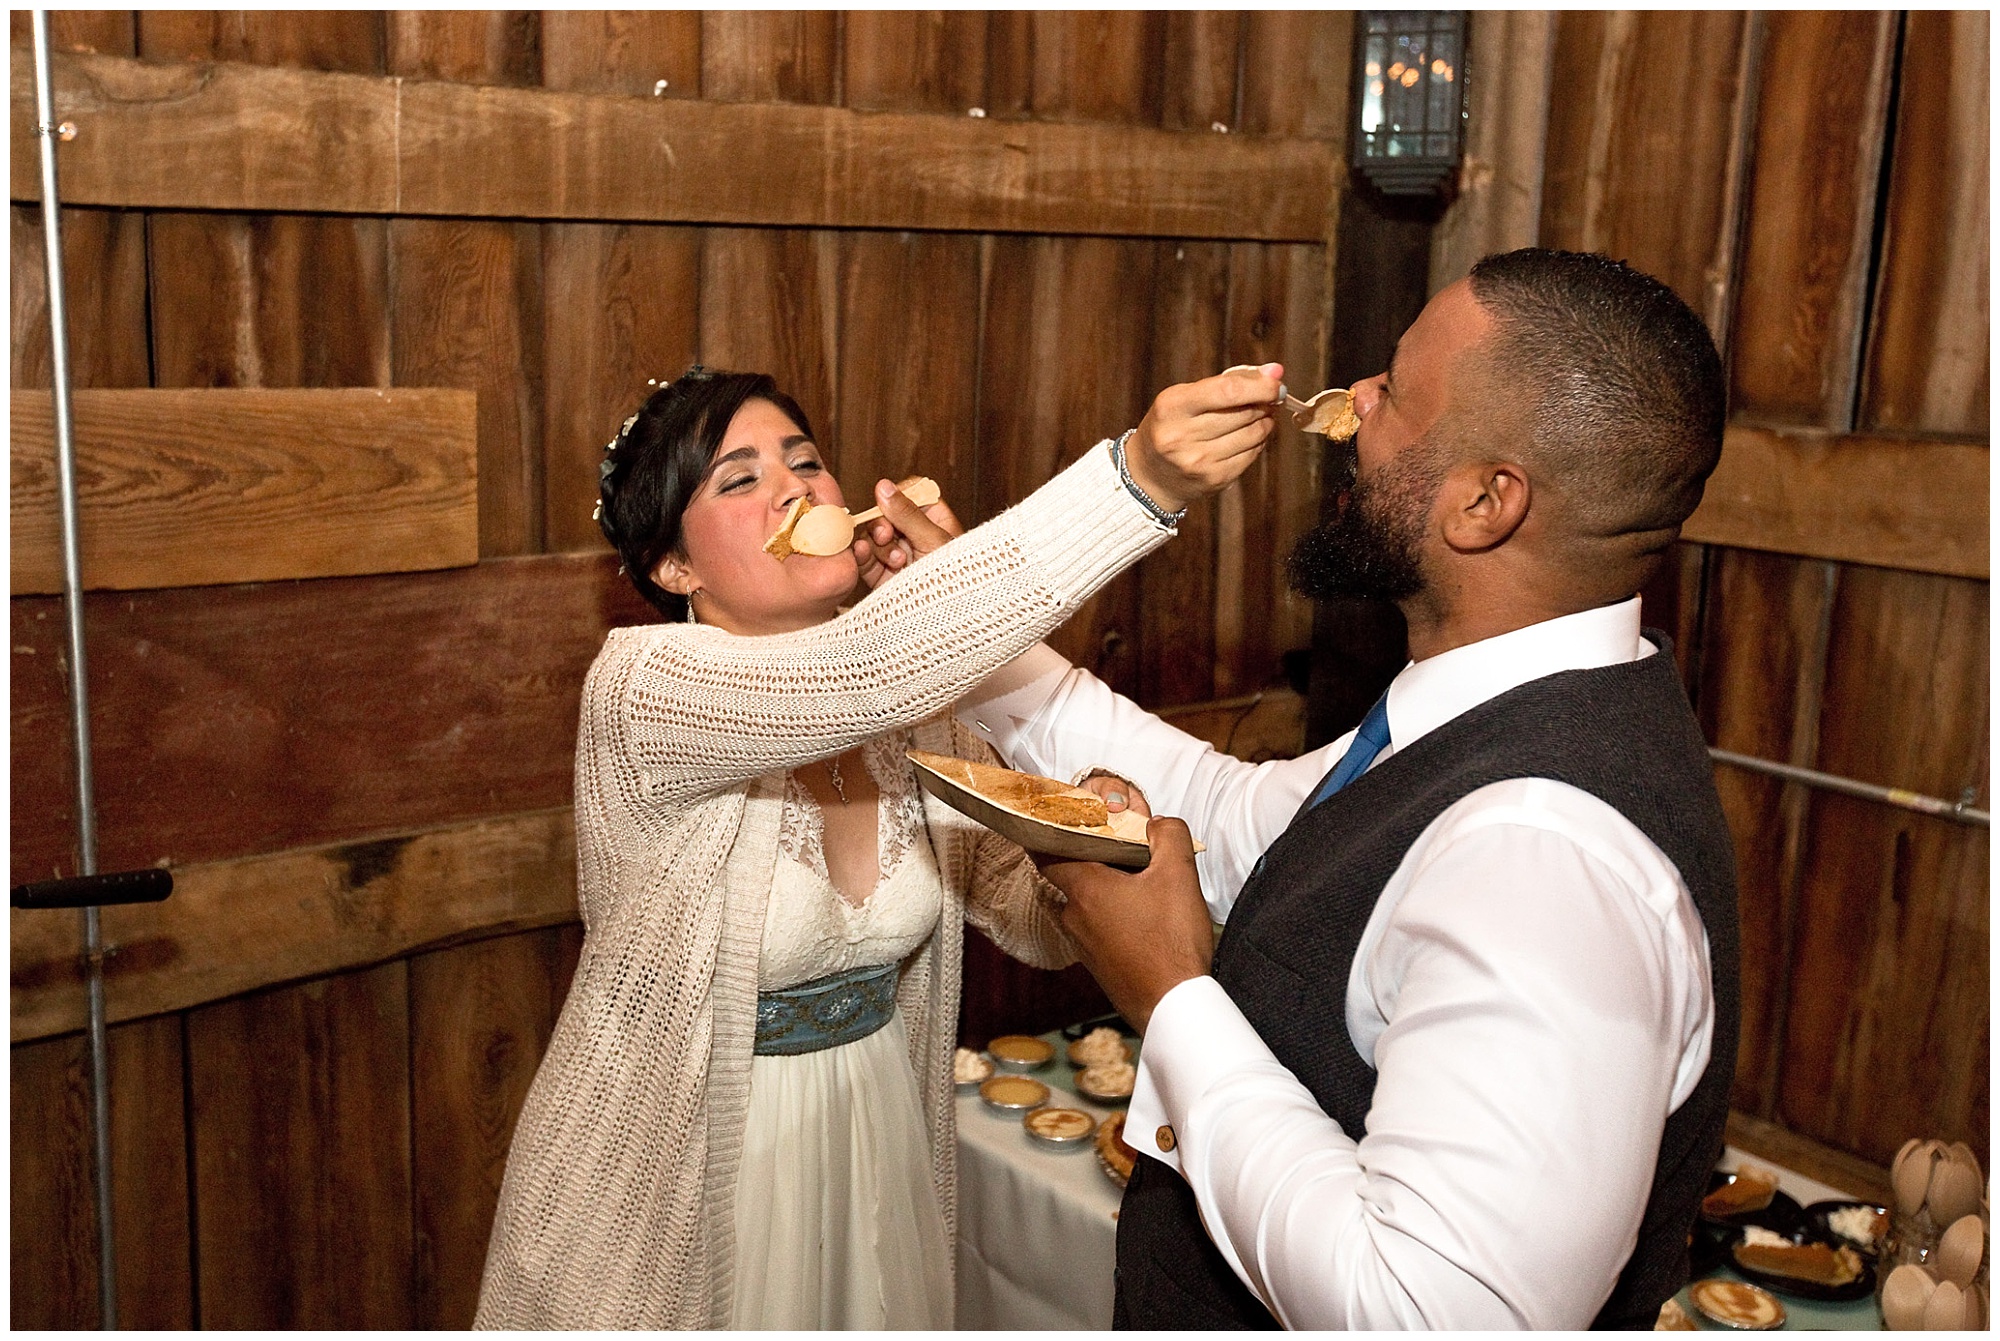 Bride and groom feeding each other pie rather than the traditional wedding cake.